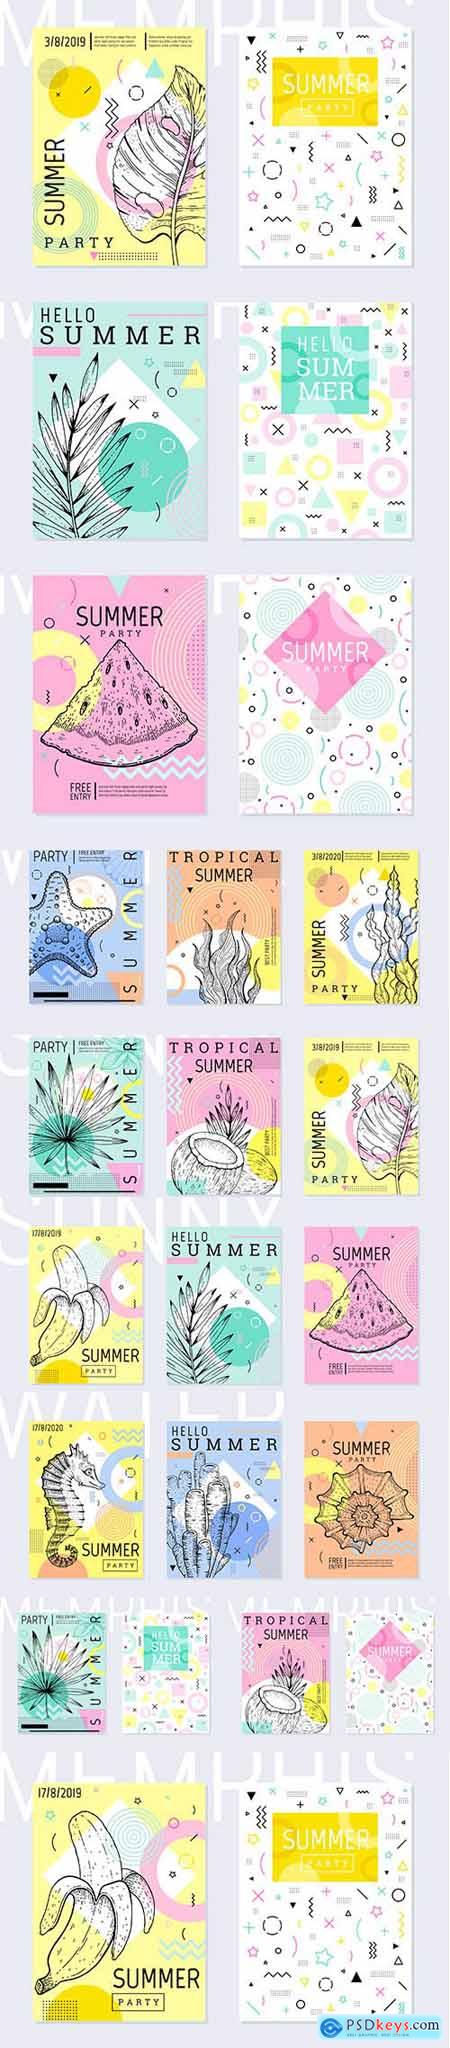 Summer Party Poster Set Geometric Memphis Style